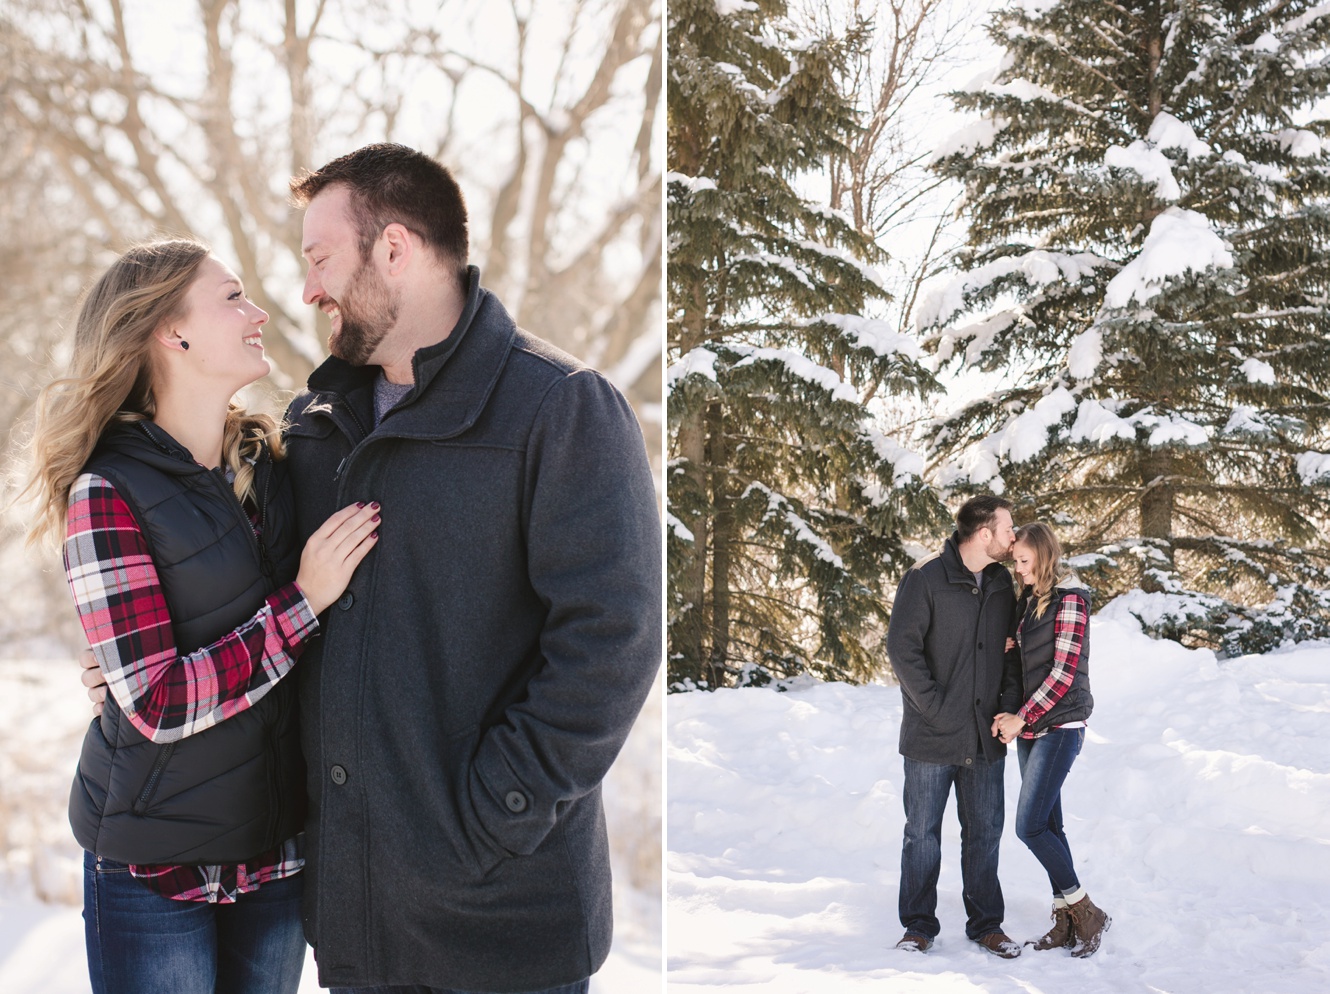 What to wear winter engagement photo